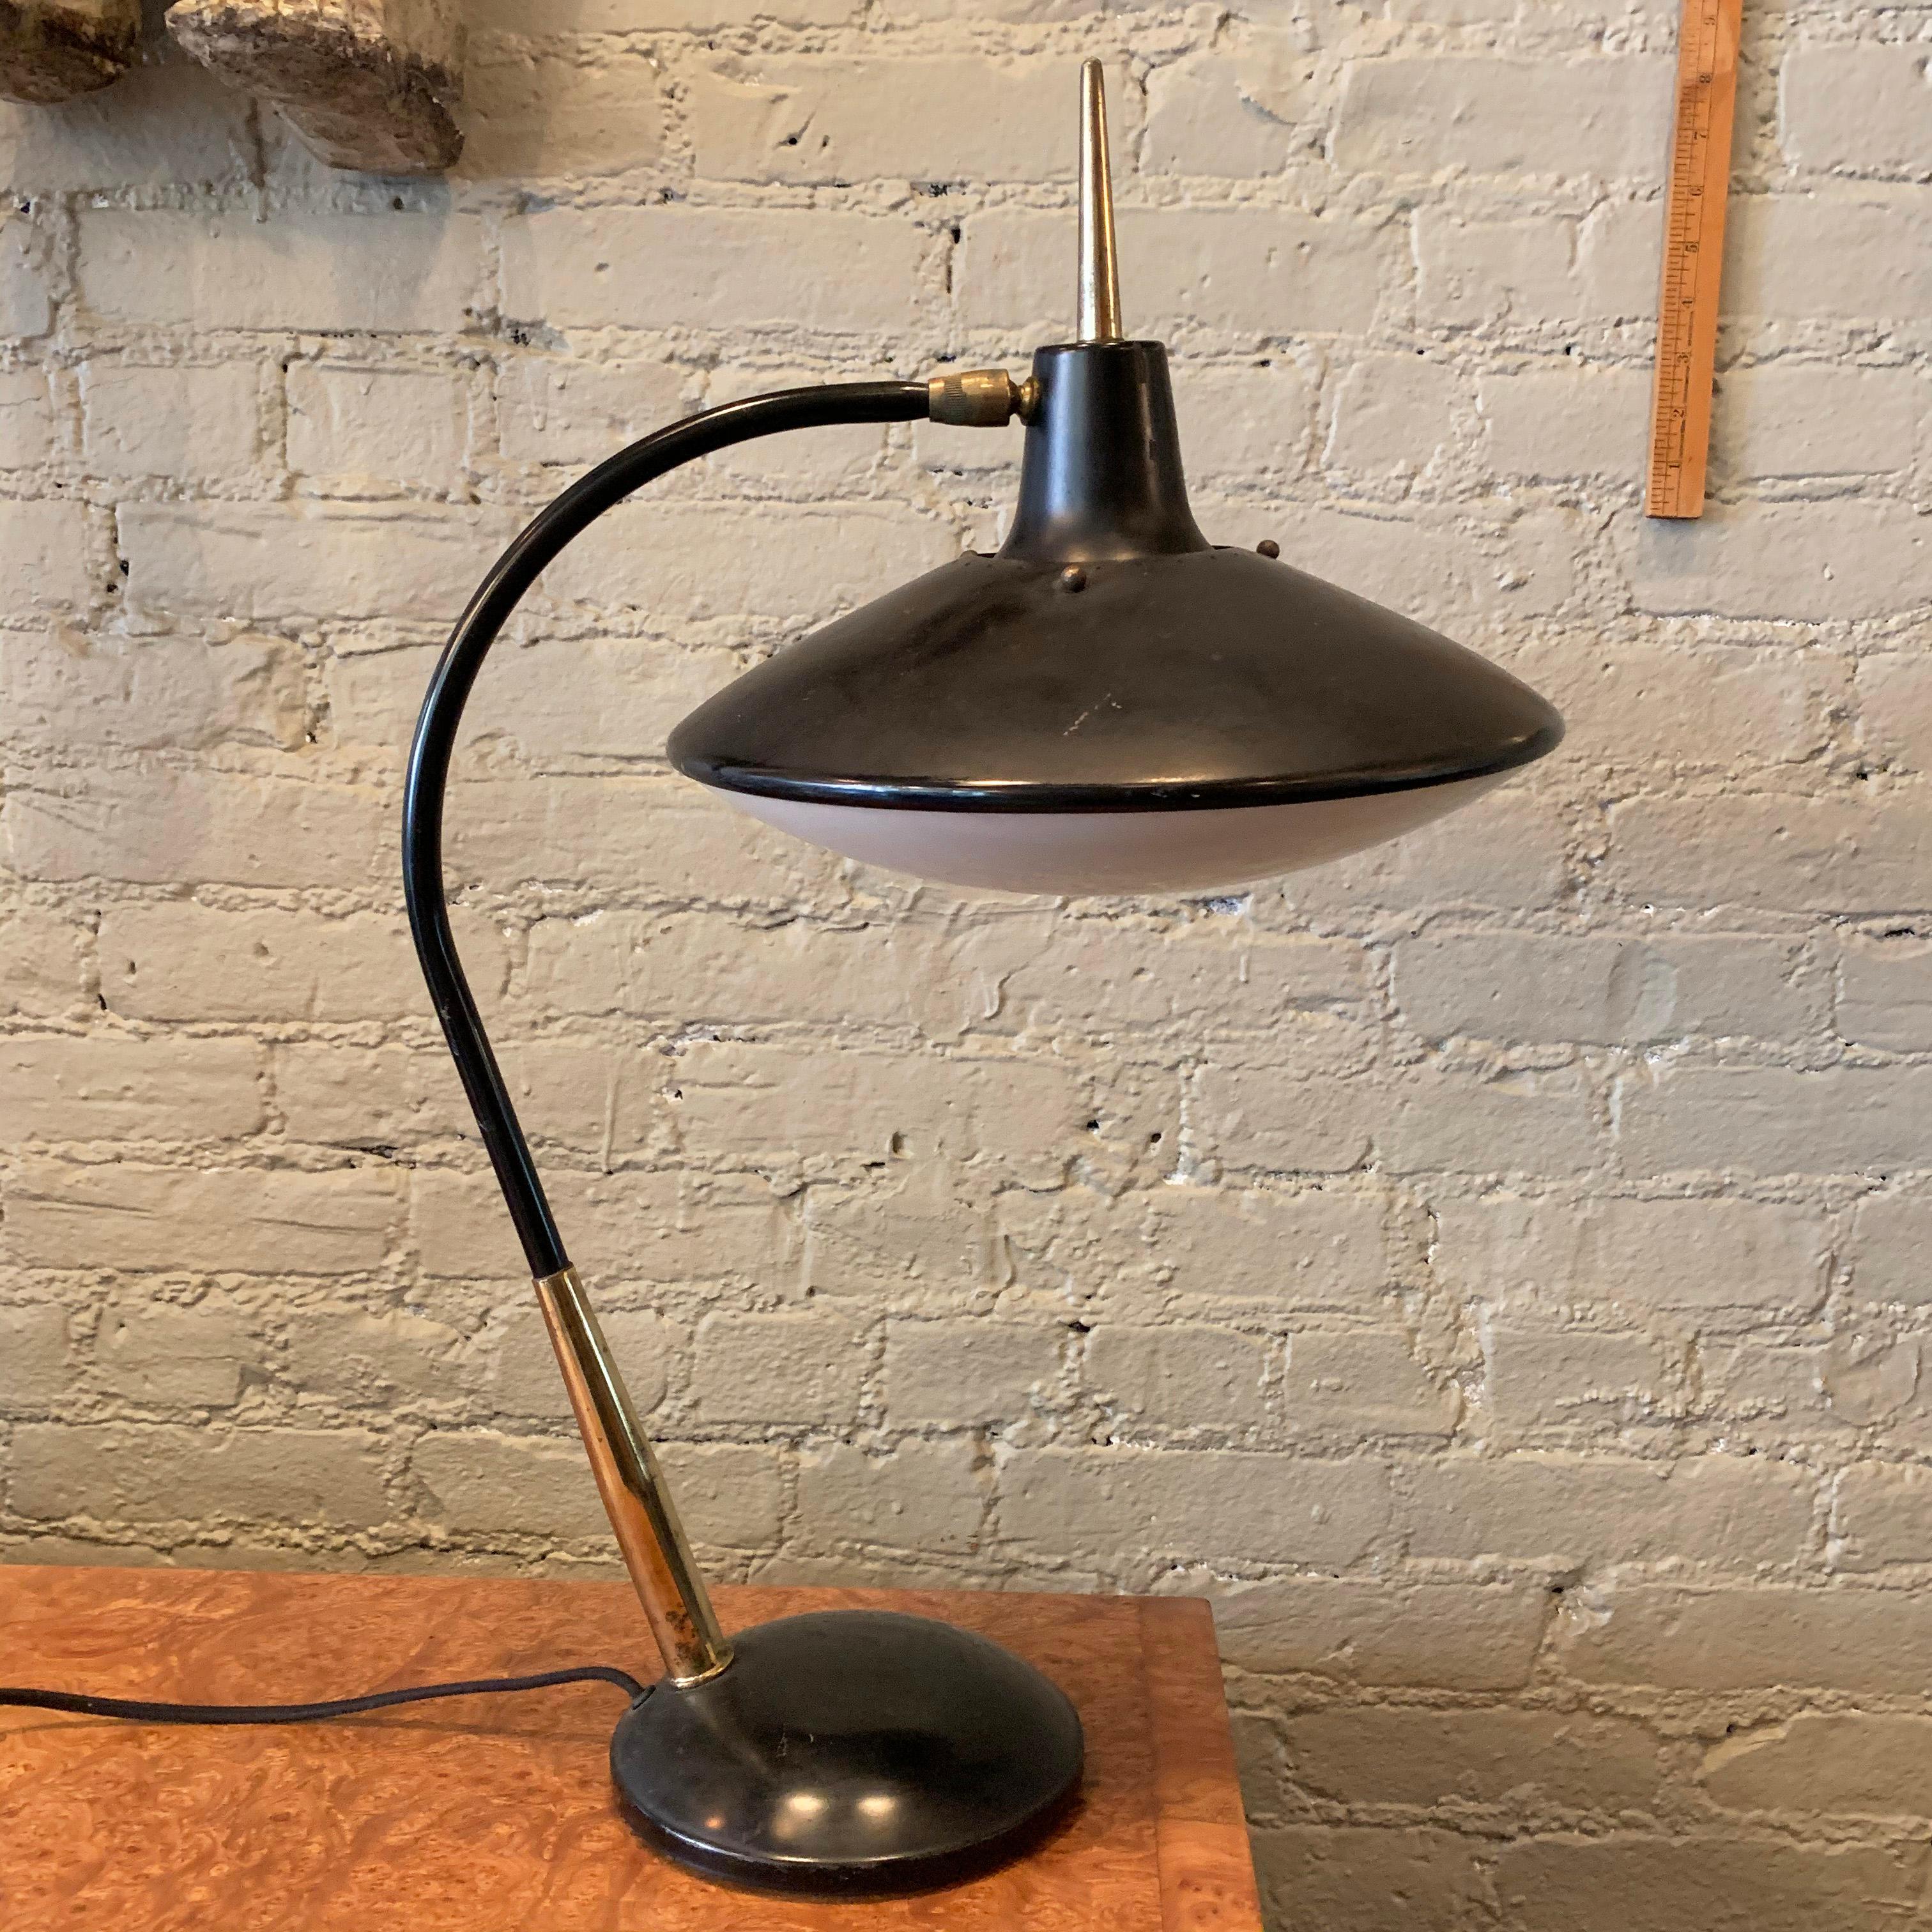 Mid-Century Modern, desk lamp by Gerald Thurston for Lightolier features an articulating, 12 inch diameter, spun aluminum with Lucite diffuser saucer shade on an arched stem with brass detail. The base is 7 inch diameter.